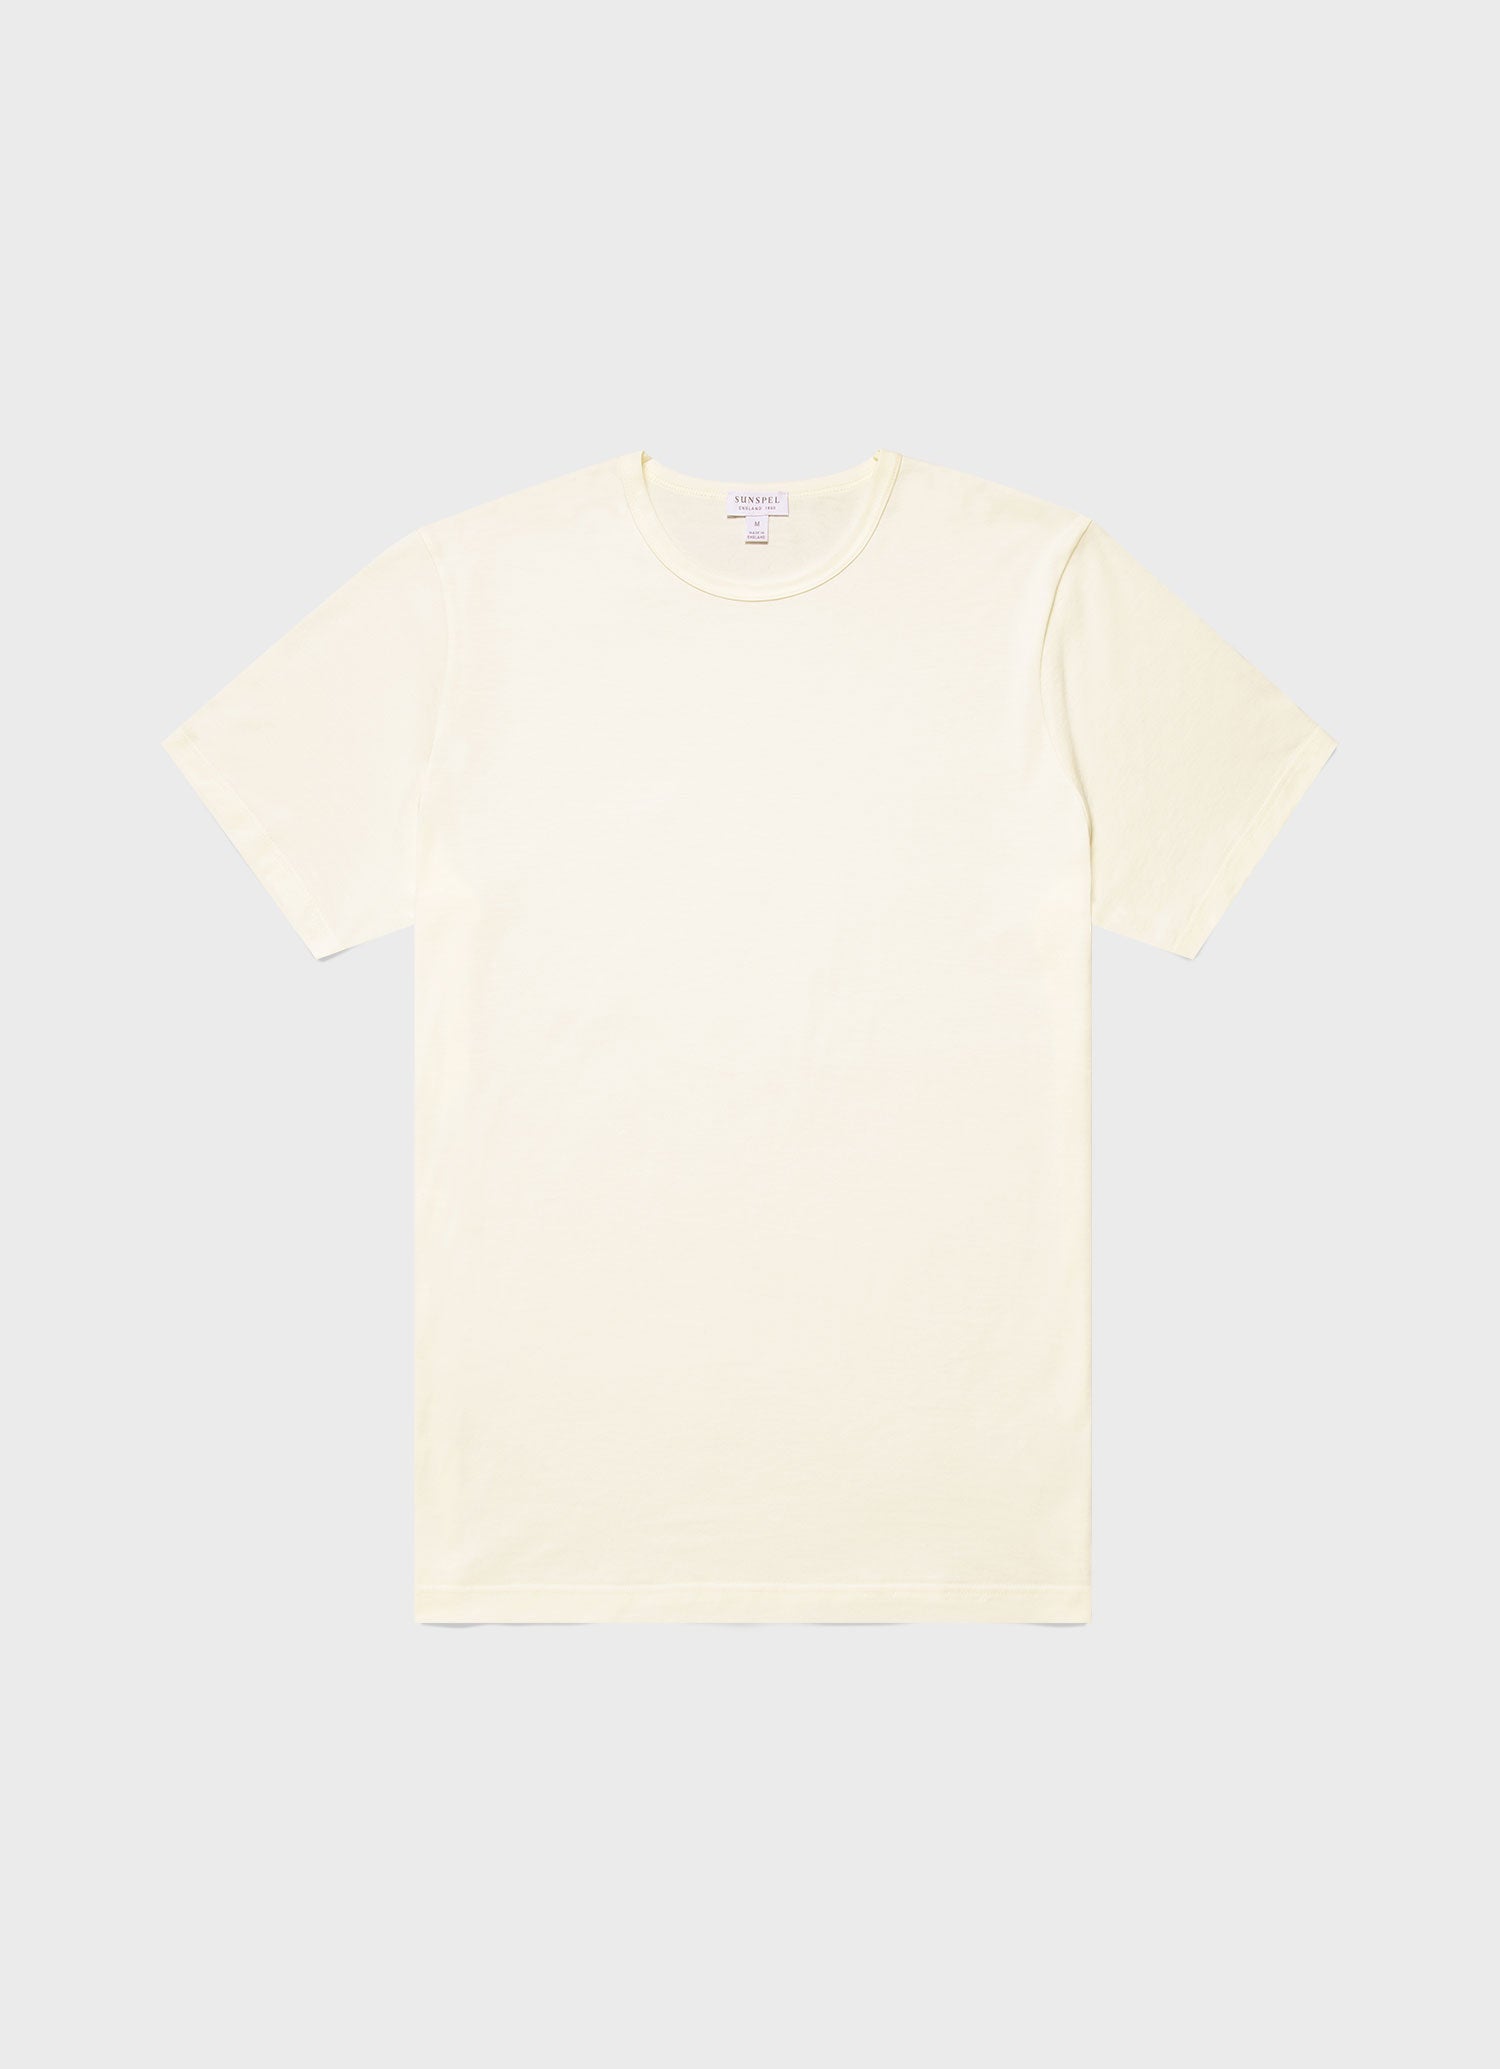 Men's Classic T-shirt in Archive White